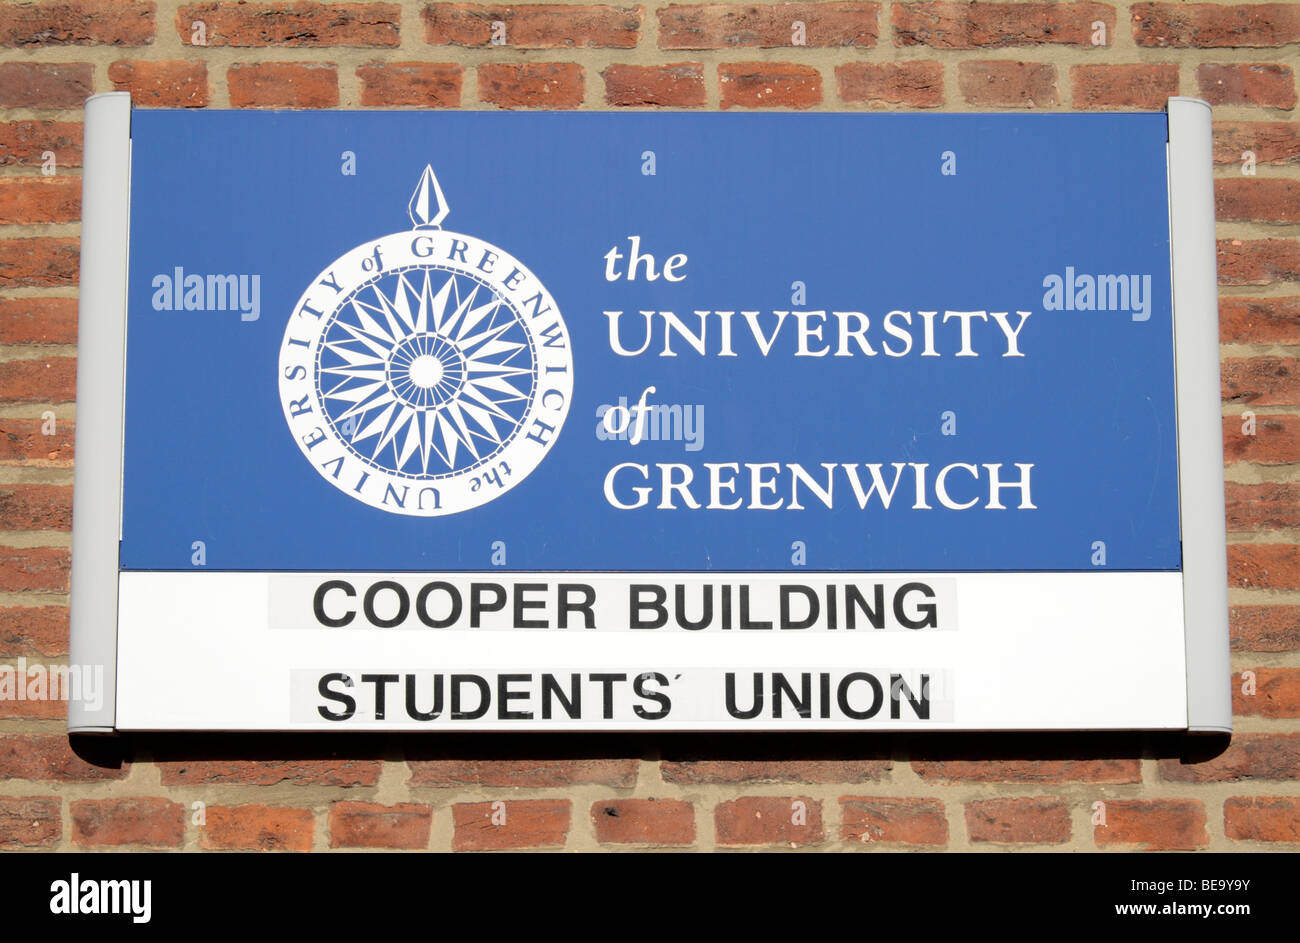 Entrance sign to the University of Greenwich Student Union Cooper Building in Greenwich east London, UK. Stock Photo